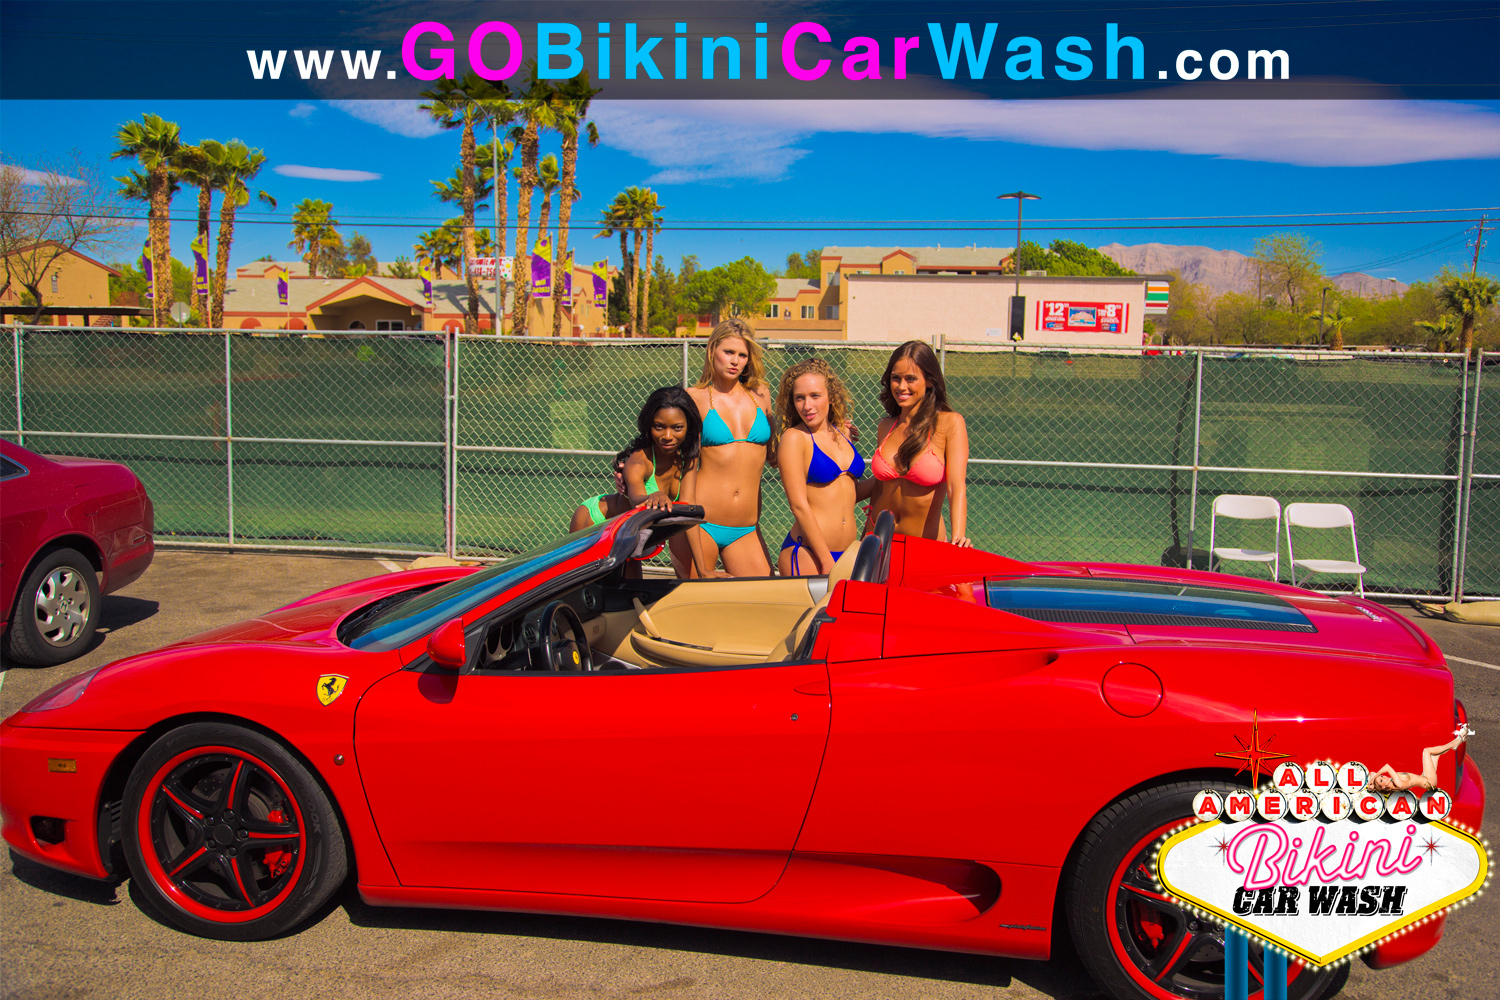 All American Bikini Car Wash New Movie Release Now Available On Video On Demand